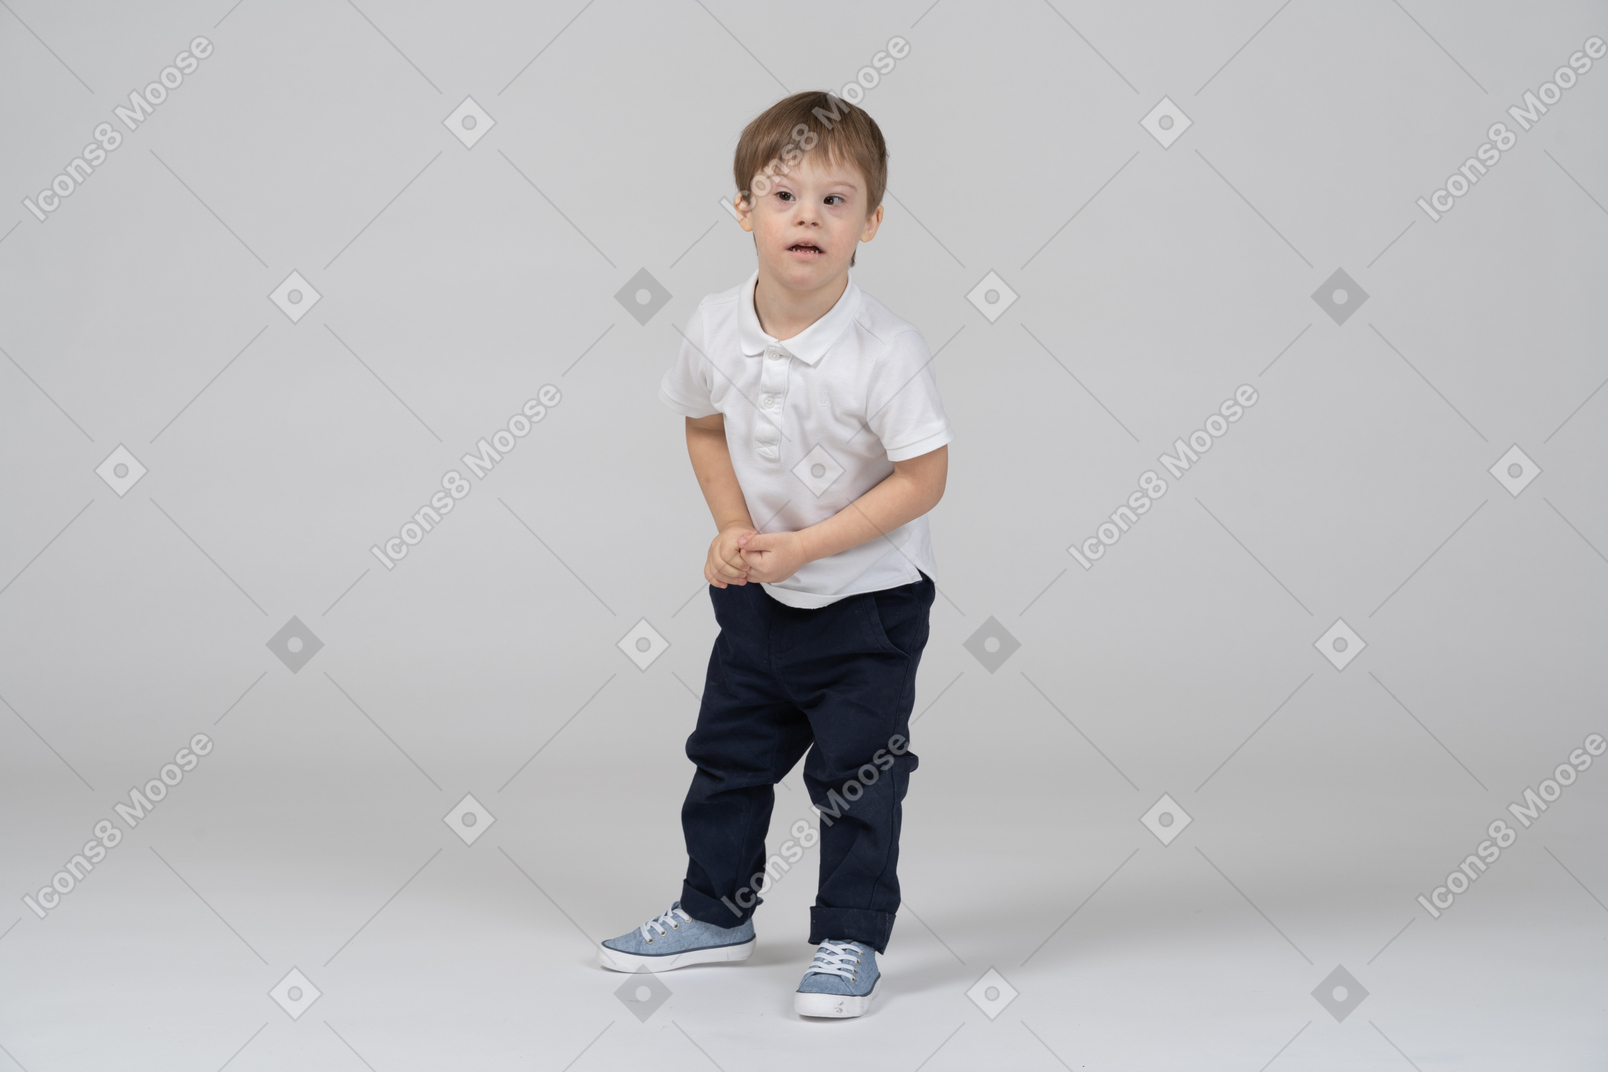 Distracted little boy standing with his hands together